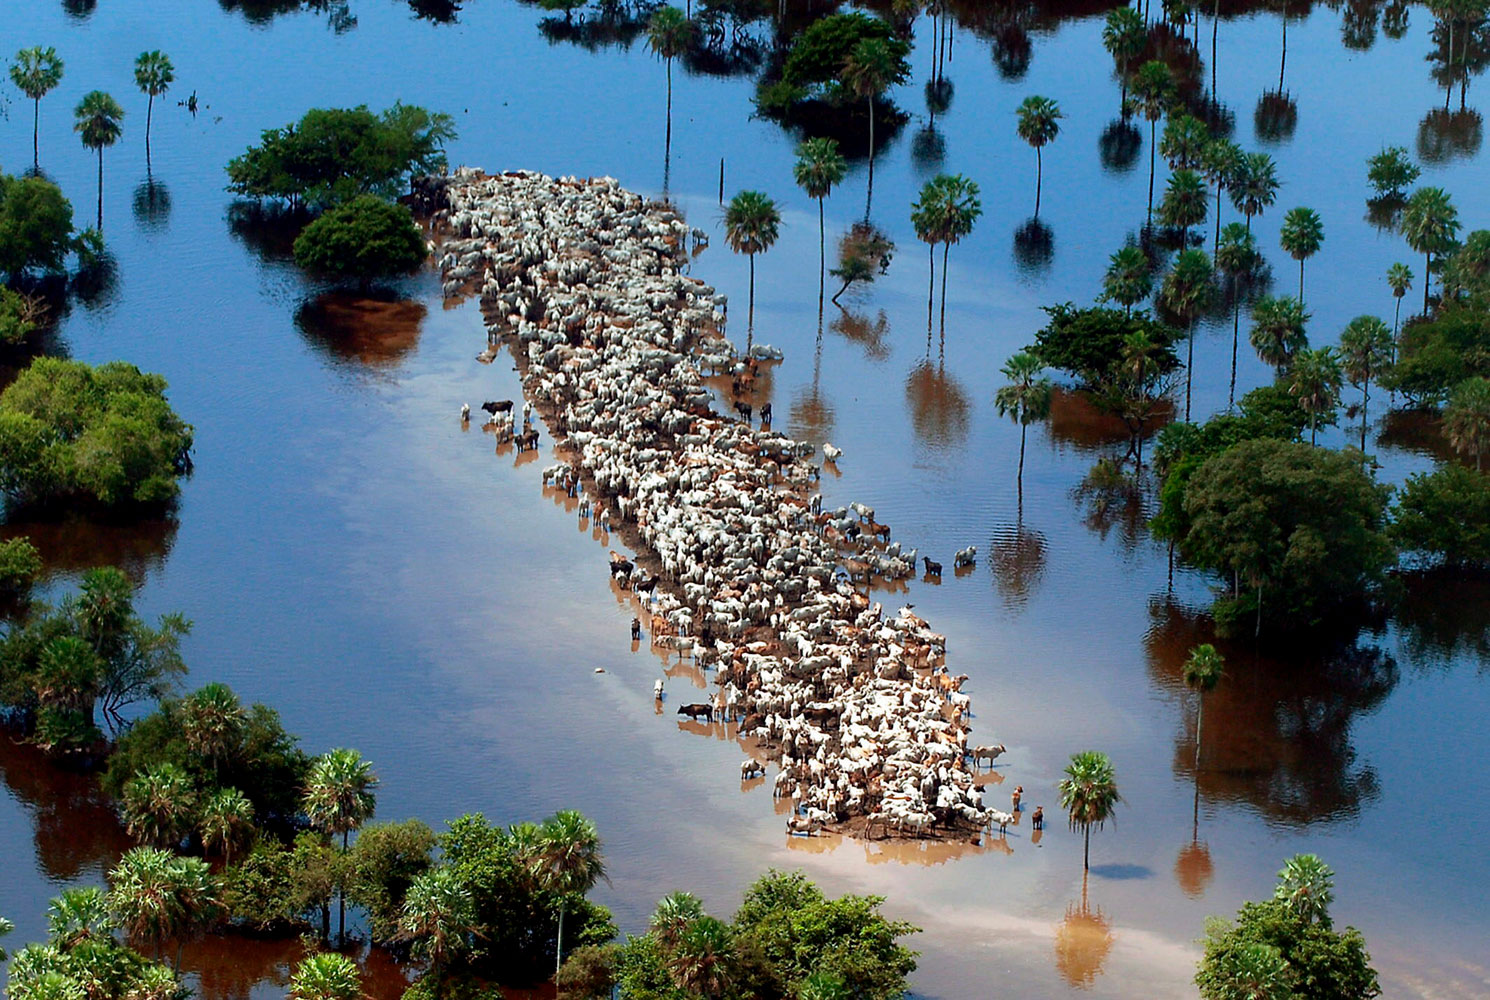 Cattle gather on a strip of dry land in low-lying areas of the Bolivian Amazon, after heavy rains from the El Nino weather phenomenon on Feb 22, 2007 in Beni, Bolivia. The rains affected 350,000 people, destroyed valuable agriculture and killed 23,000 cattle.